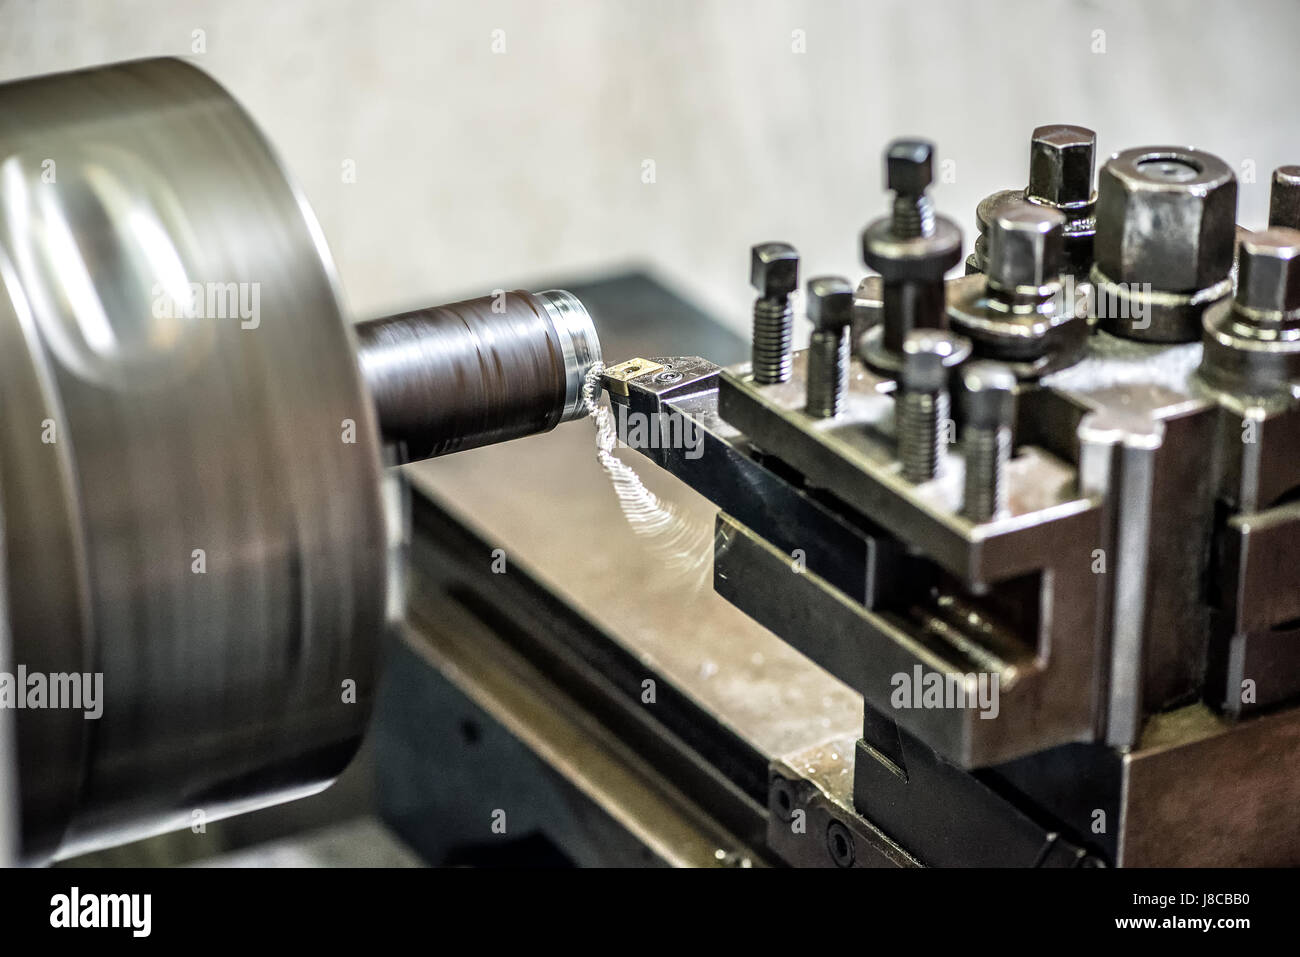 Close-up of lathe machine working with pipe clamped inside the chuck and cutter removing thin layer of metal Stock Photo